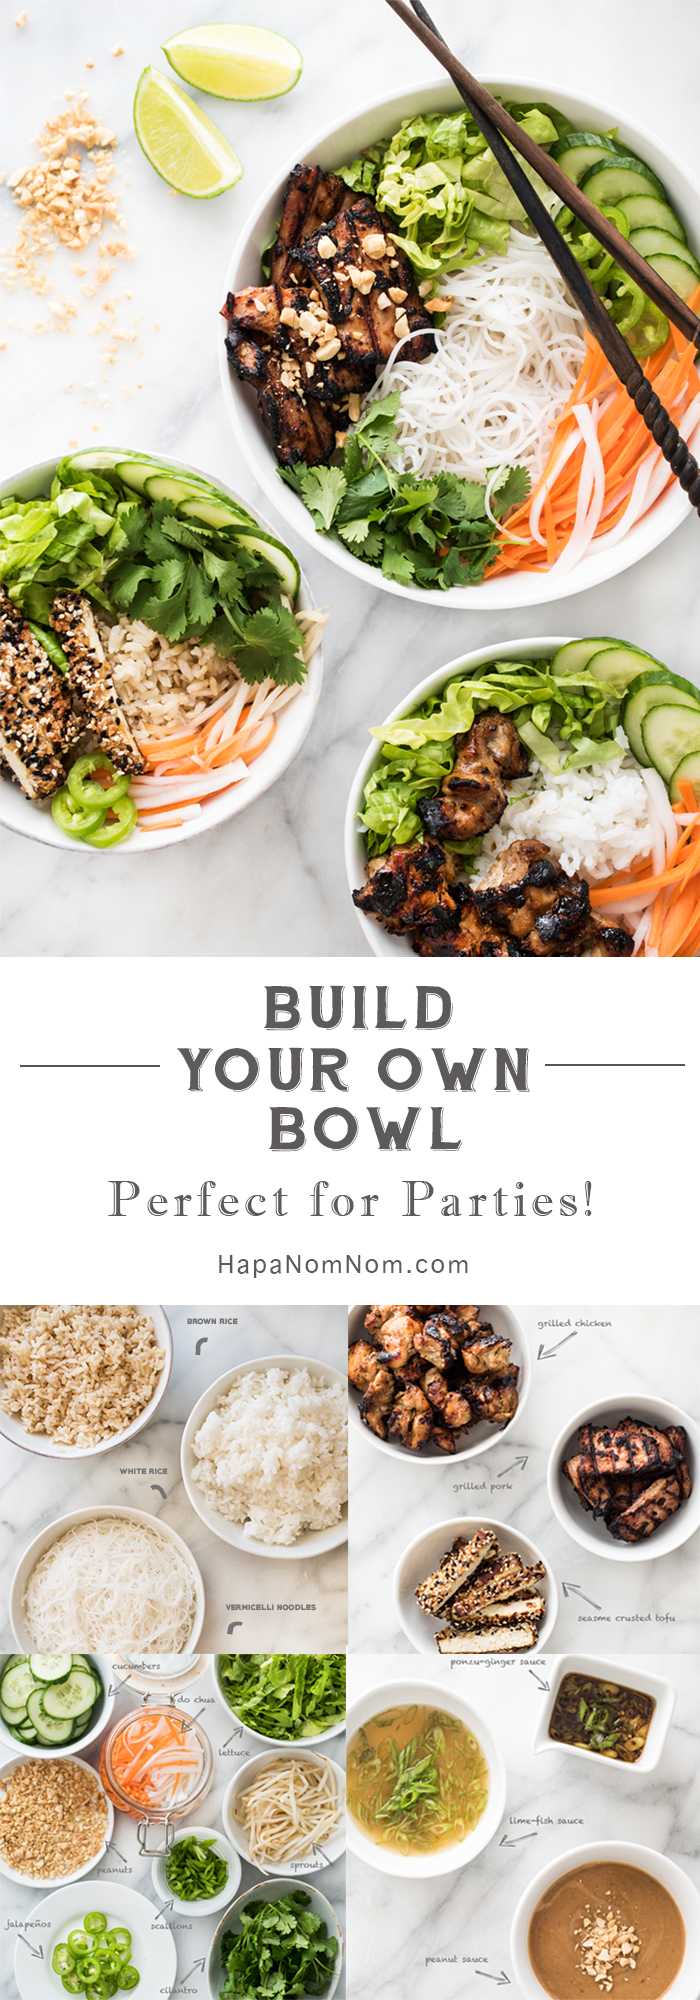 Build Your Own Bowl - Perfect for Parties!